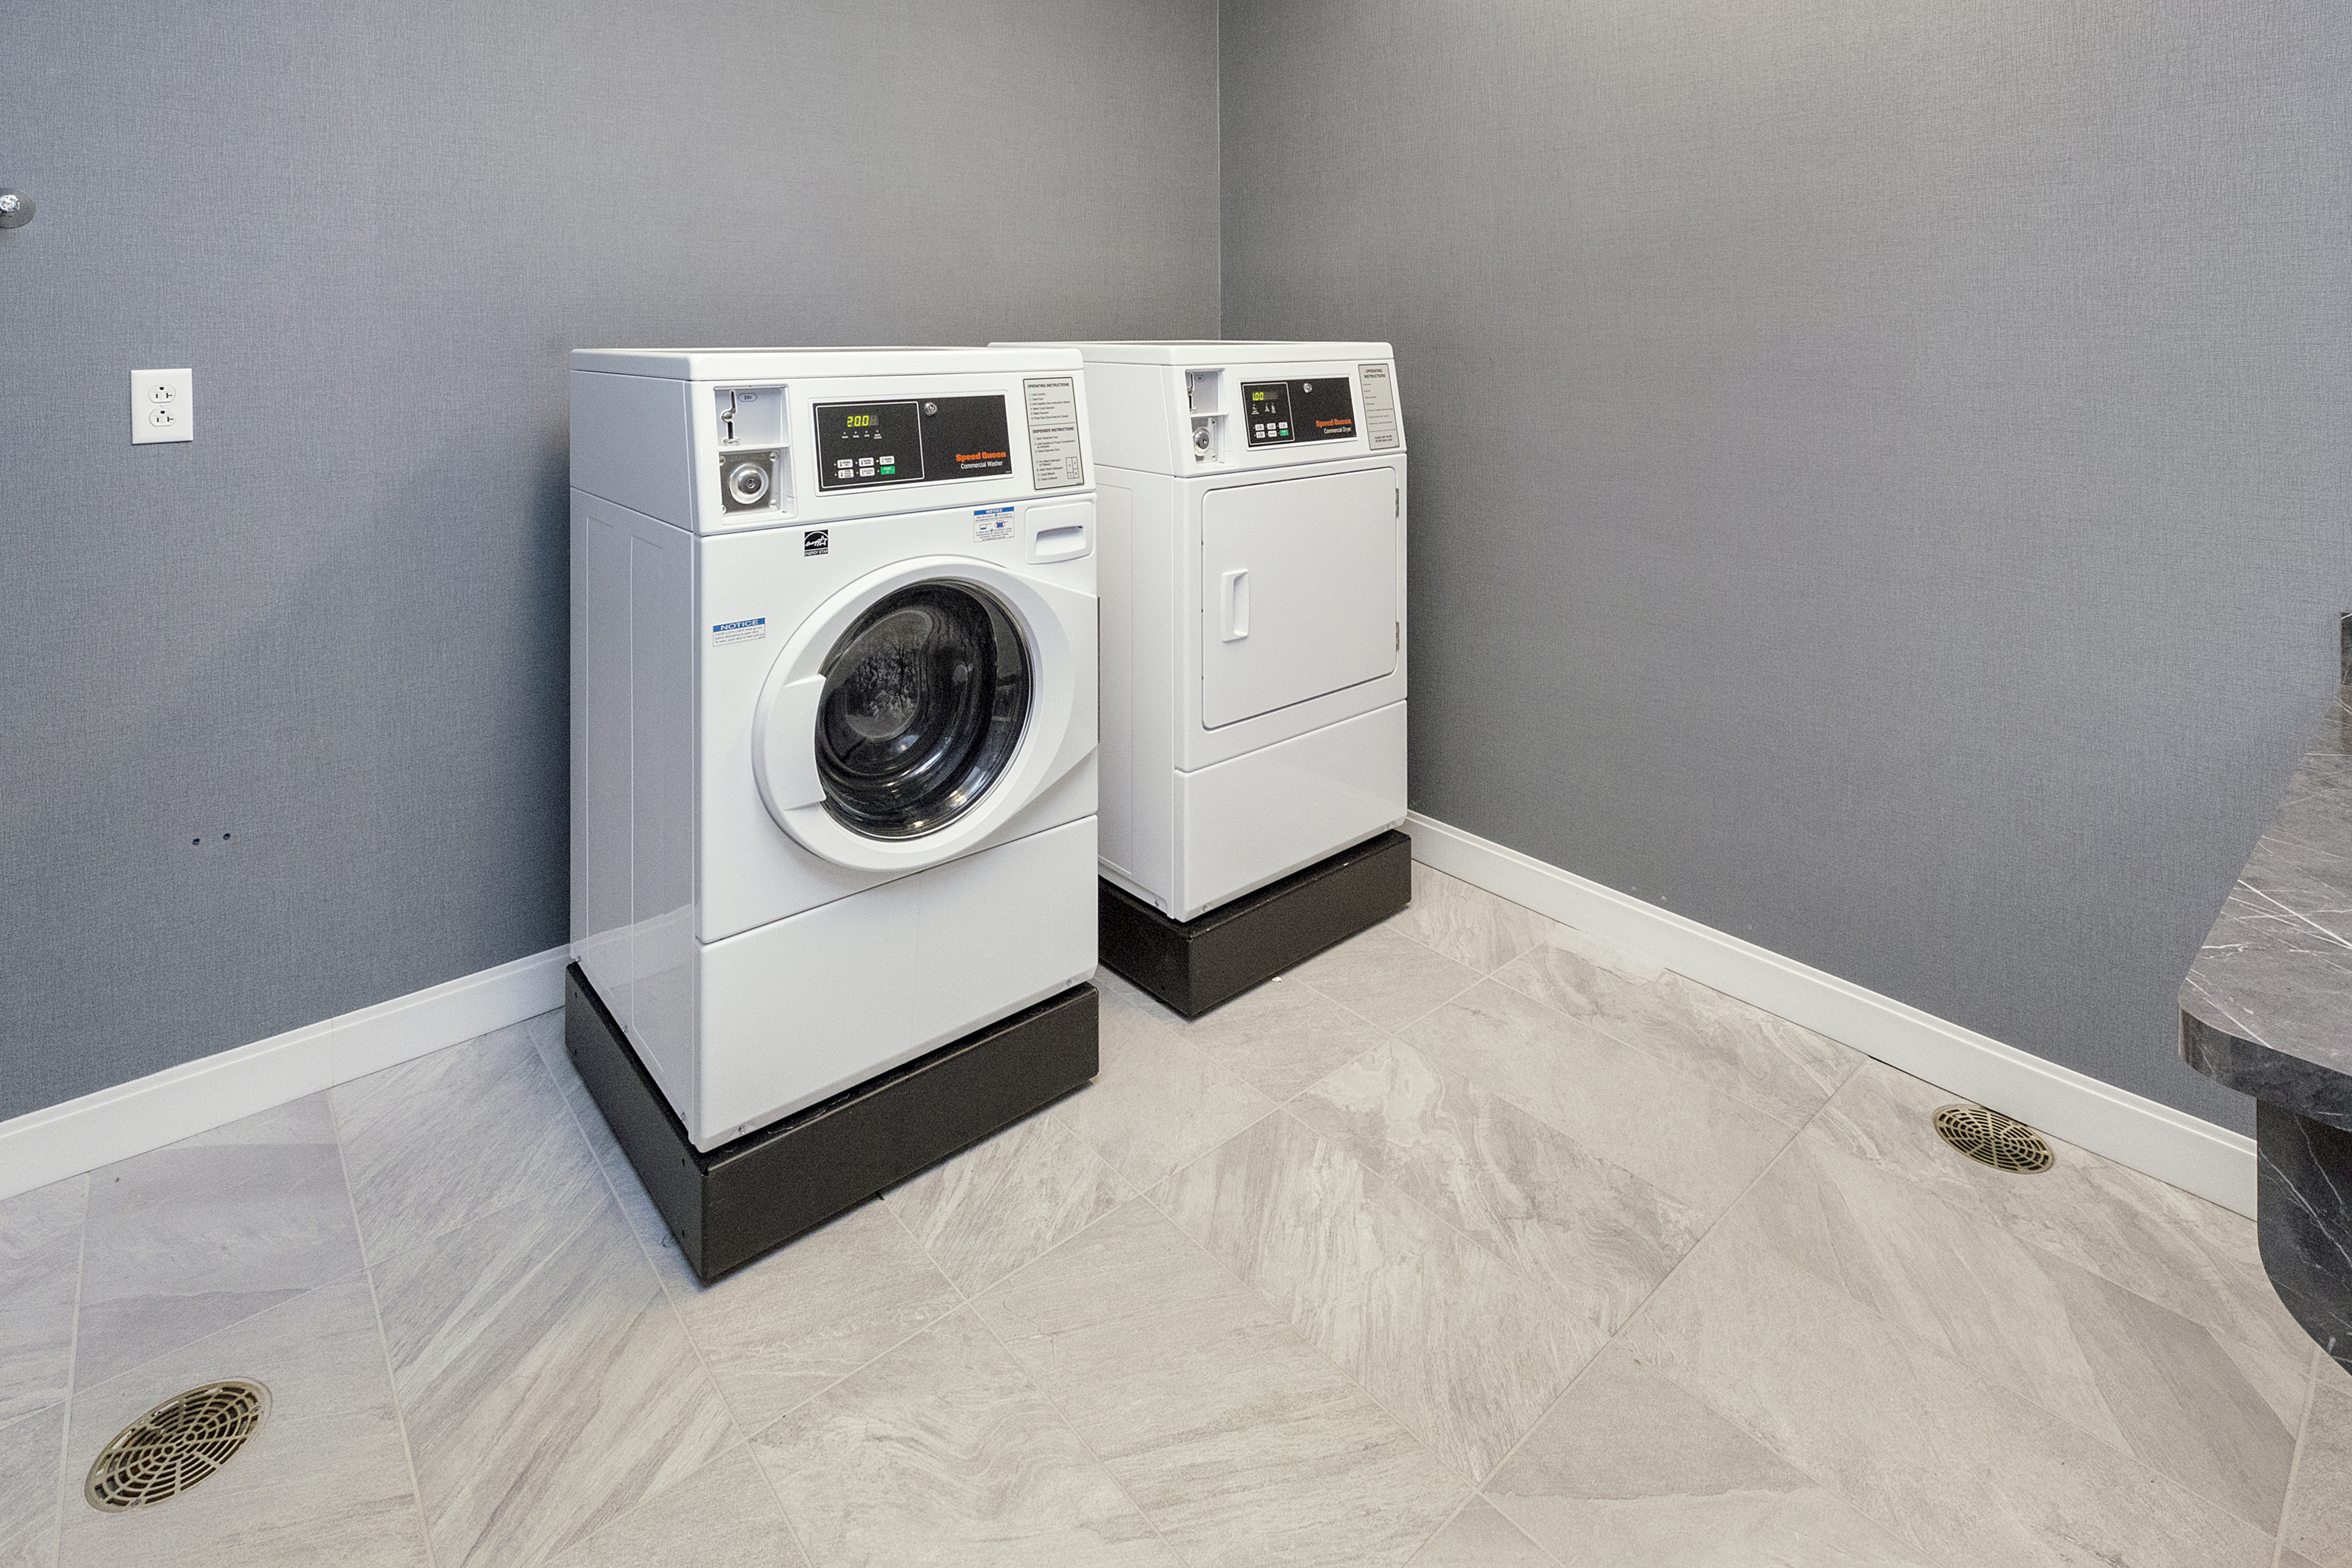 Guest Laundry Room with Two Coin-Operated Washing Machines